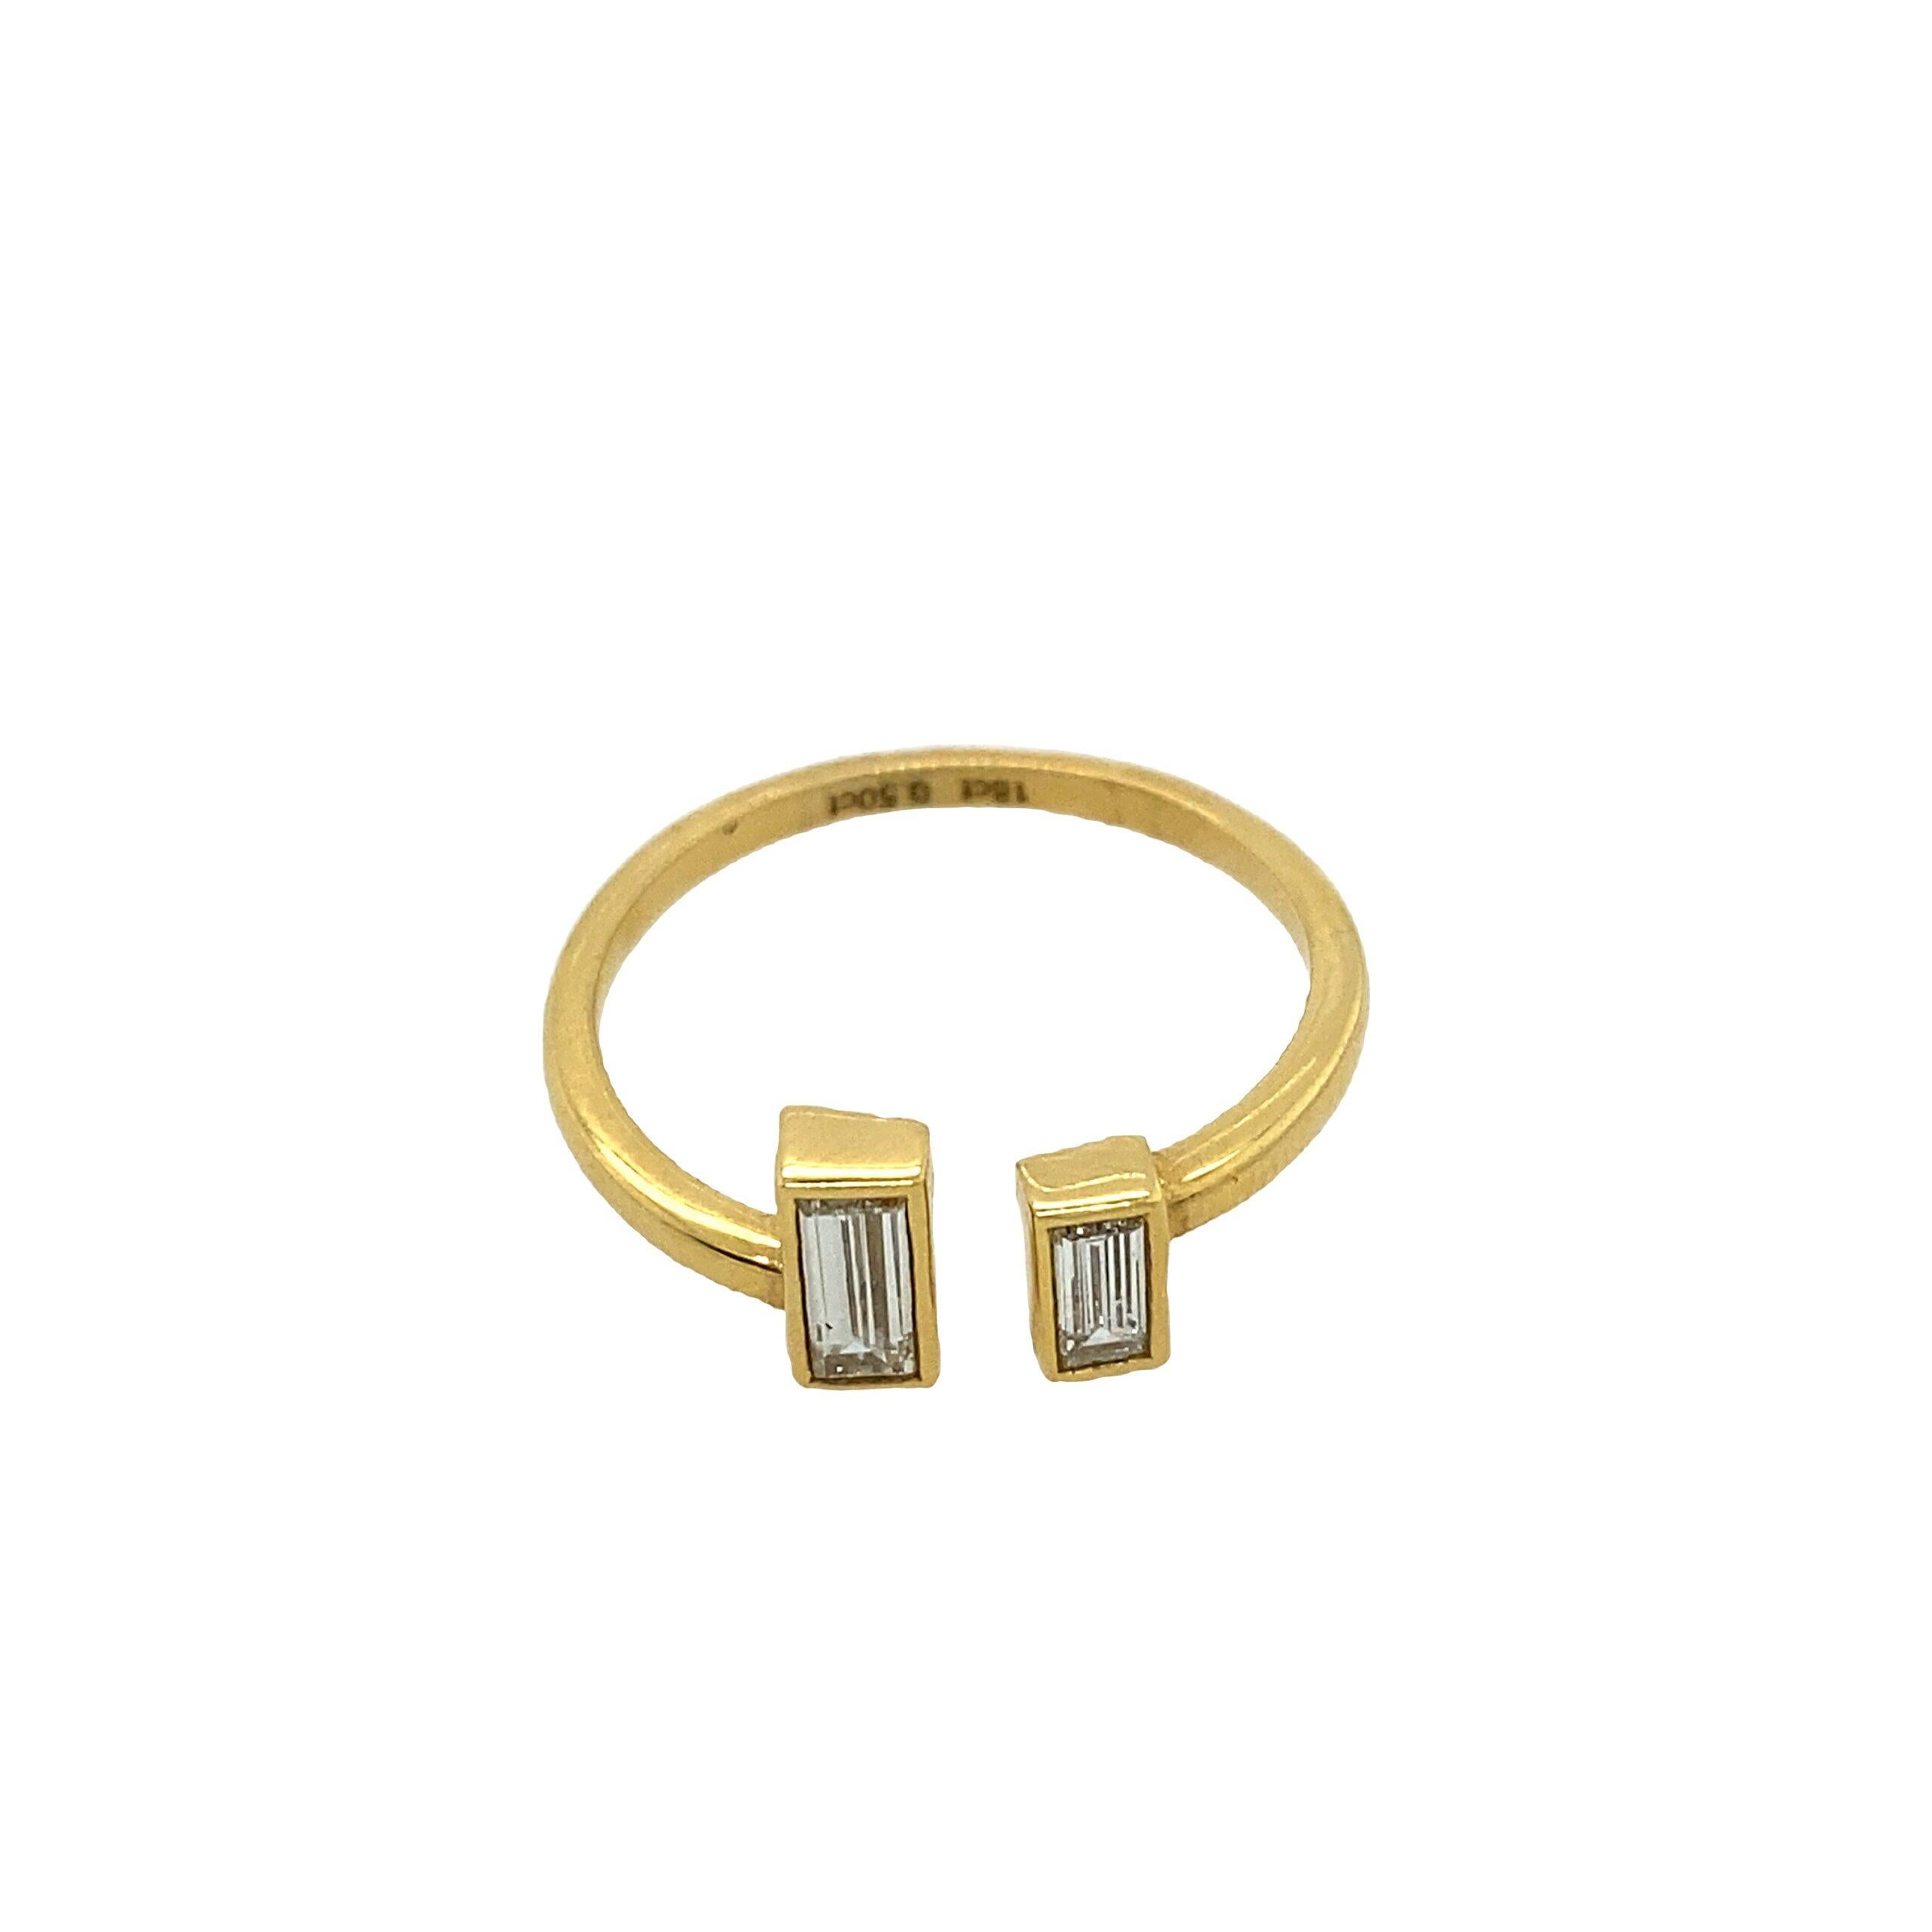 Double Diamond Baguette Ring, Set In 18ct Yellow Gold, With 0.50ct of Baguette Diamonds

Additional Information:
Total Diamond Weight: 0.50ct
 Diamond Colour: G/H
 Diamond Clarity: VS1
Width of Band: 1.6mm
Length of Head: 9.2mm
Width of Head: